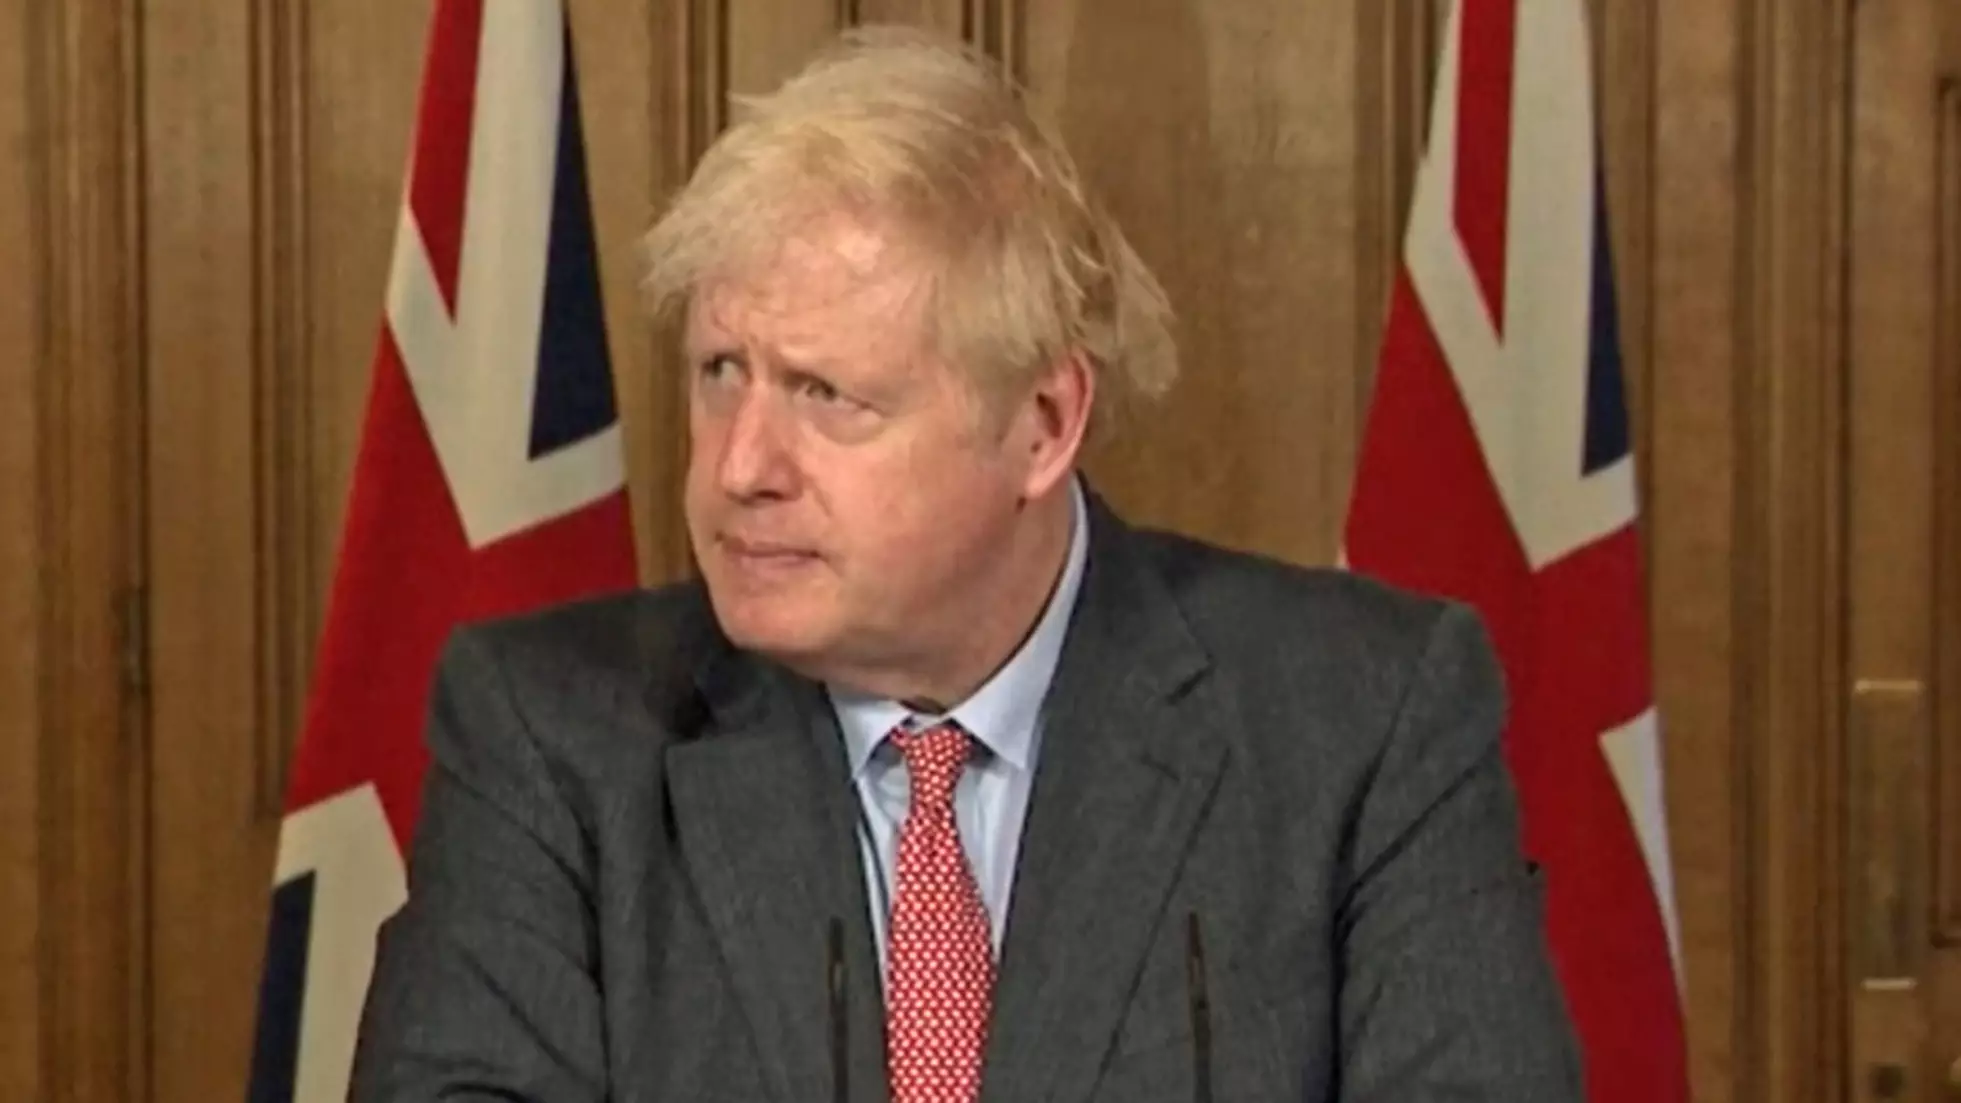 Boris Johnson 'Confident' Second Lockdown Can Be Avoided Through Working Together